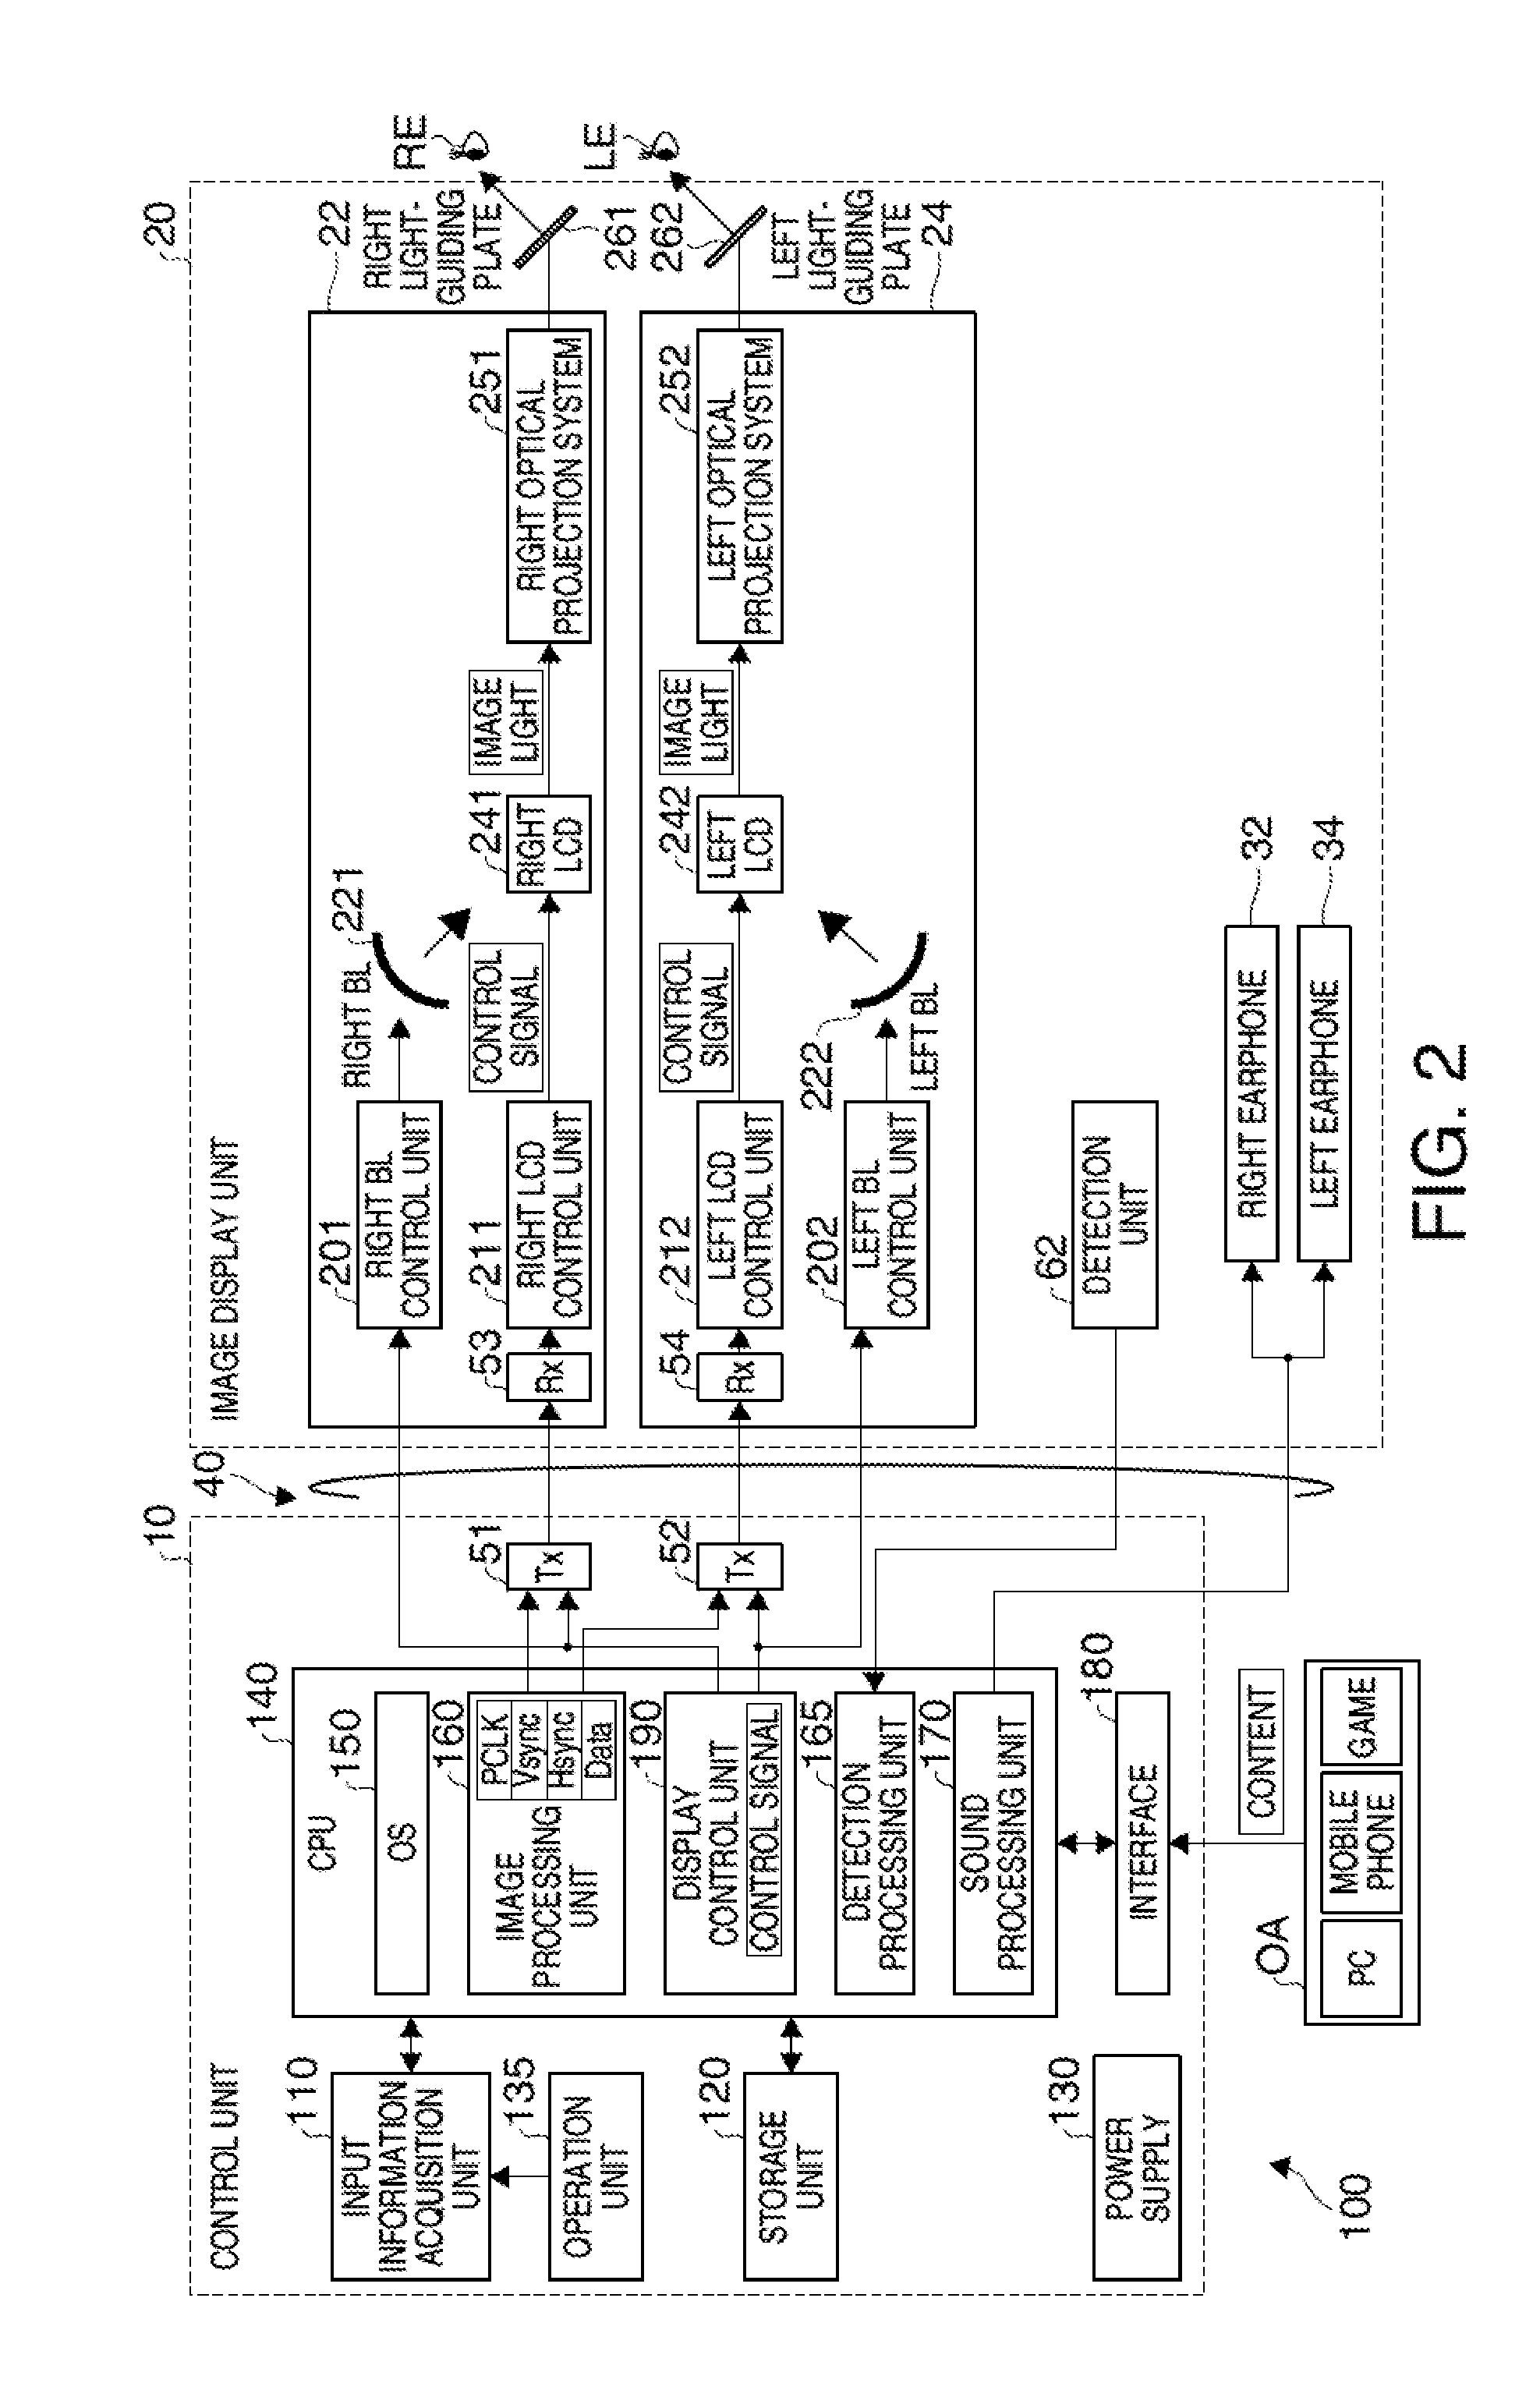 Head mounted display apparatus and method of controlling head mounted display apparatus